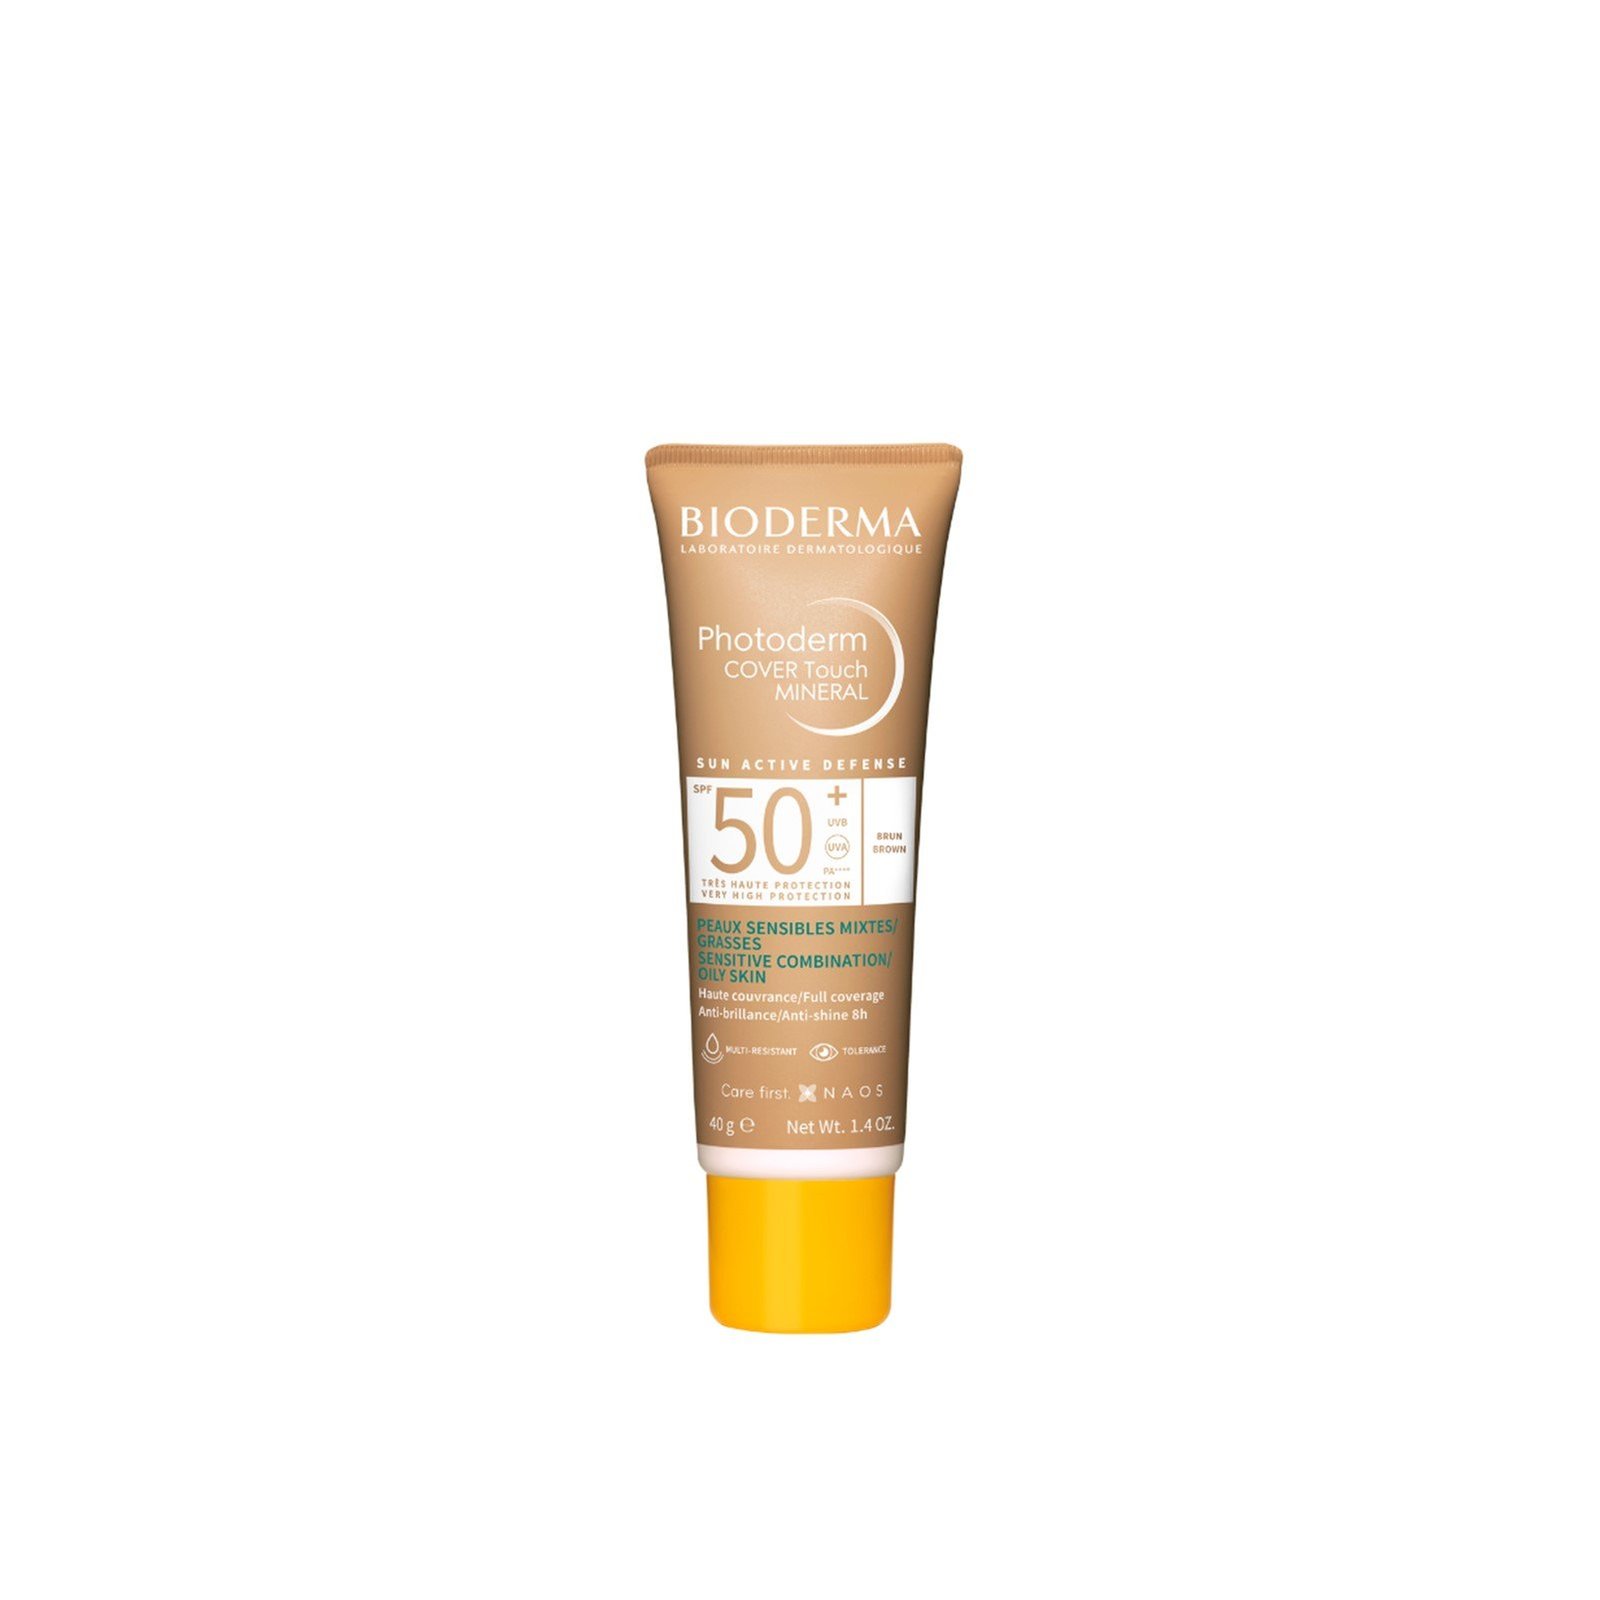 Bioderma Photoderm Cover Touch Mineral SPF50+ Brown 40g (1.4 oz)